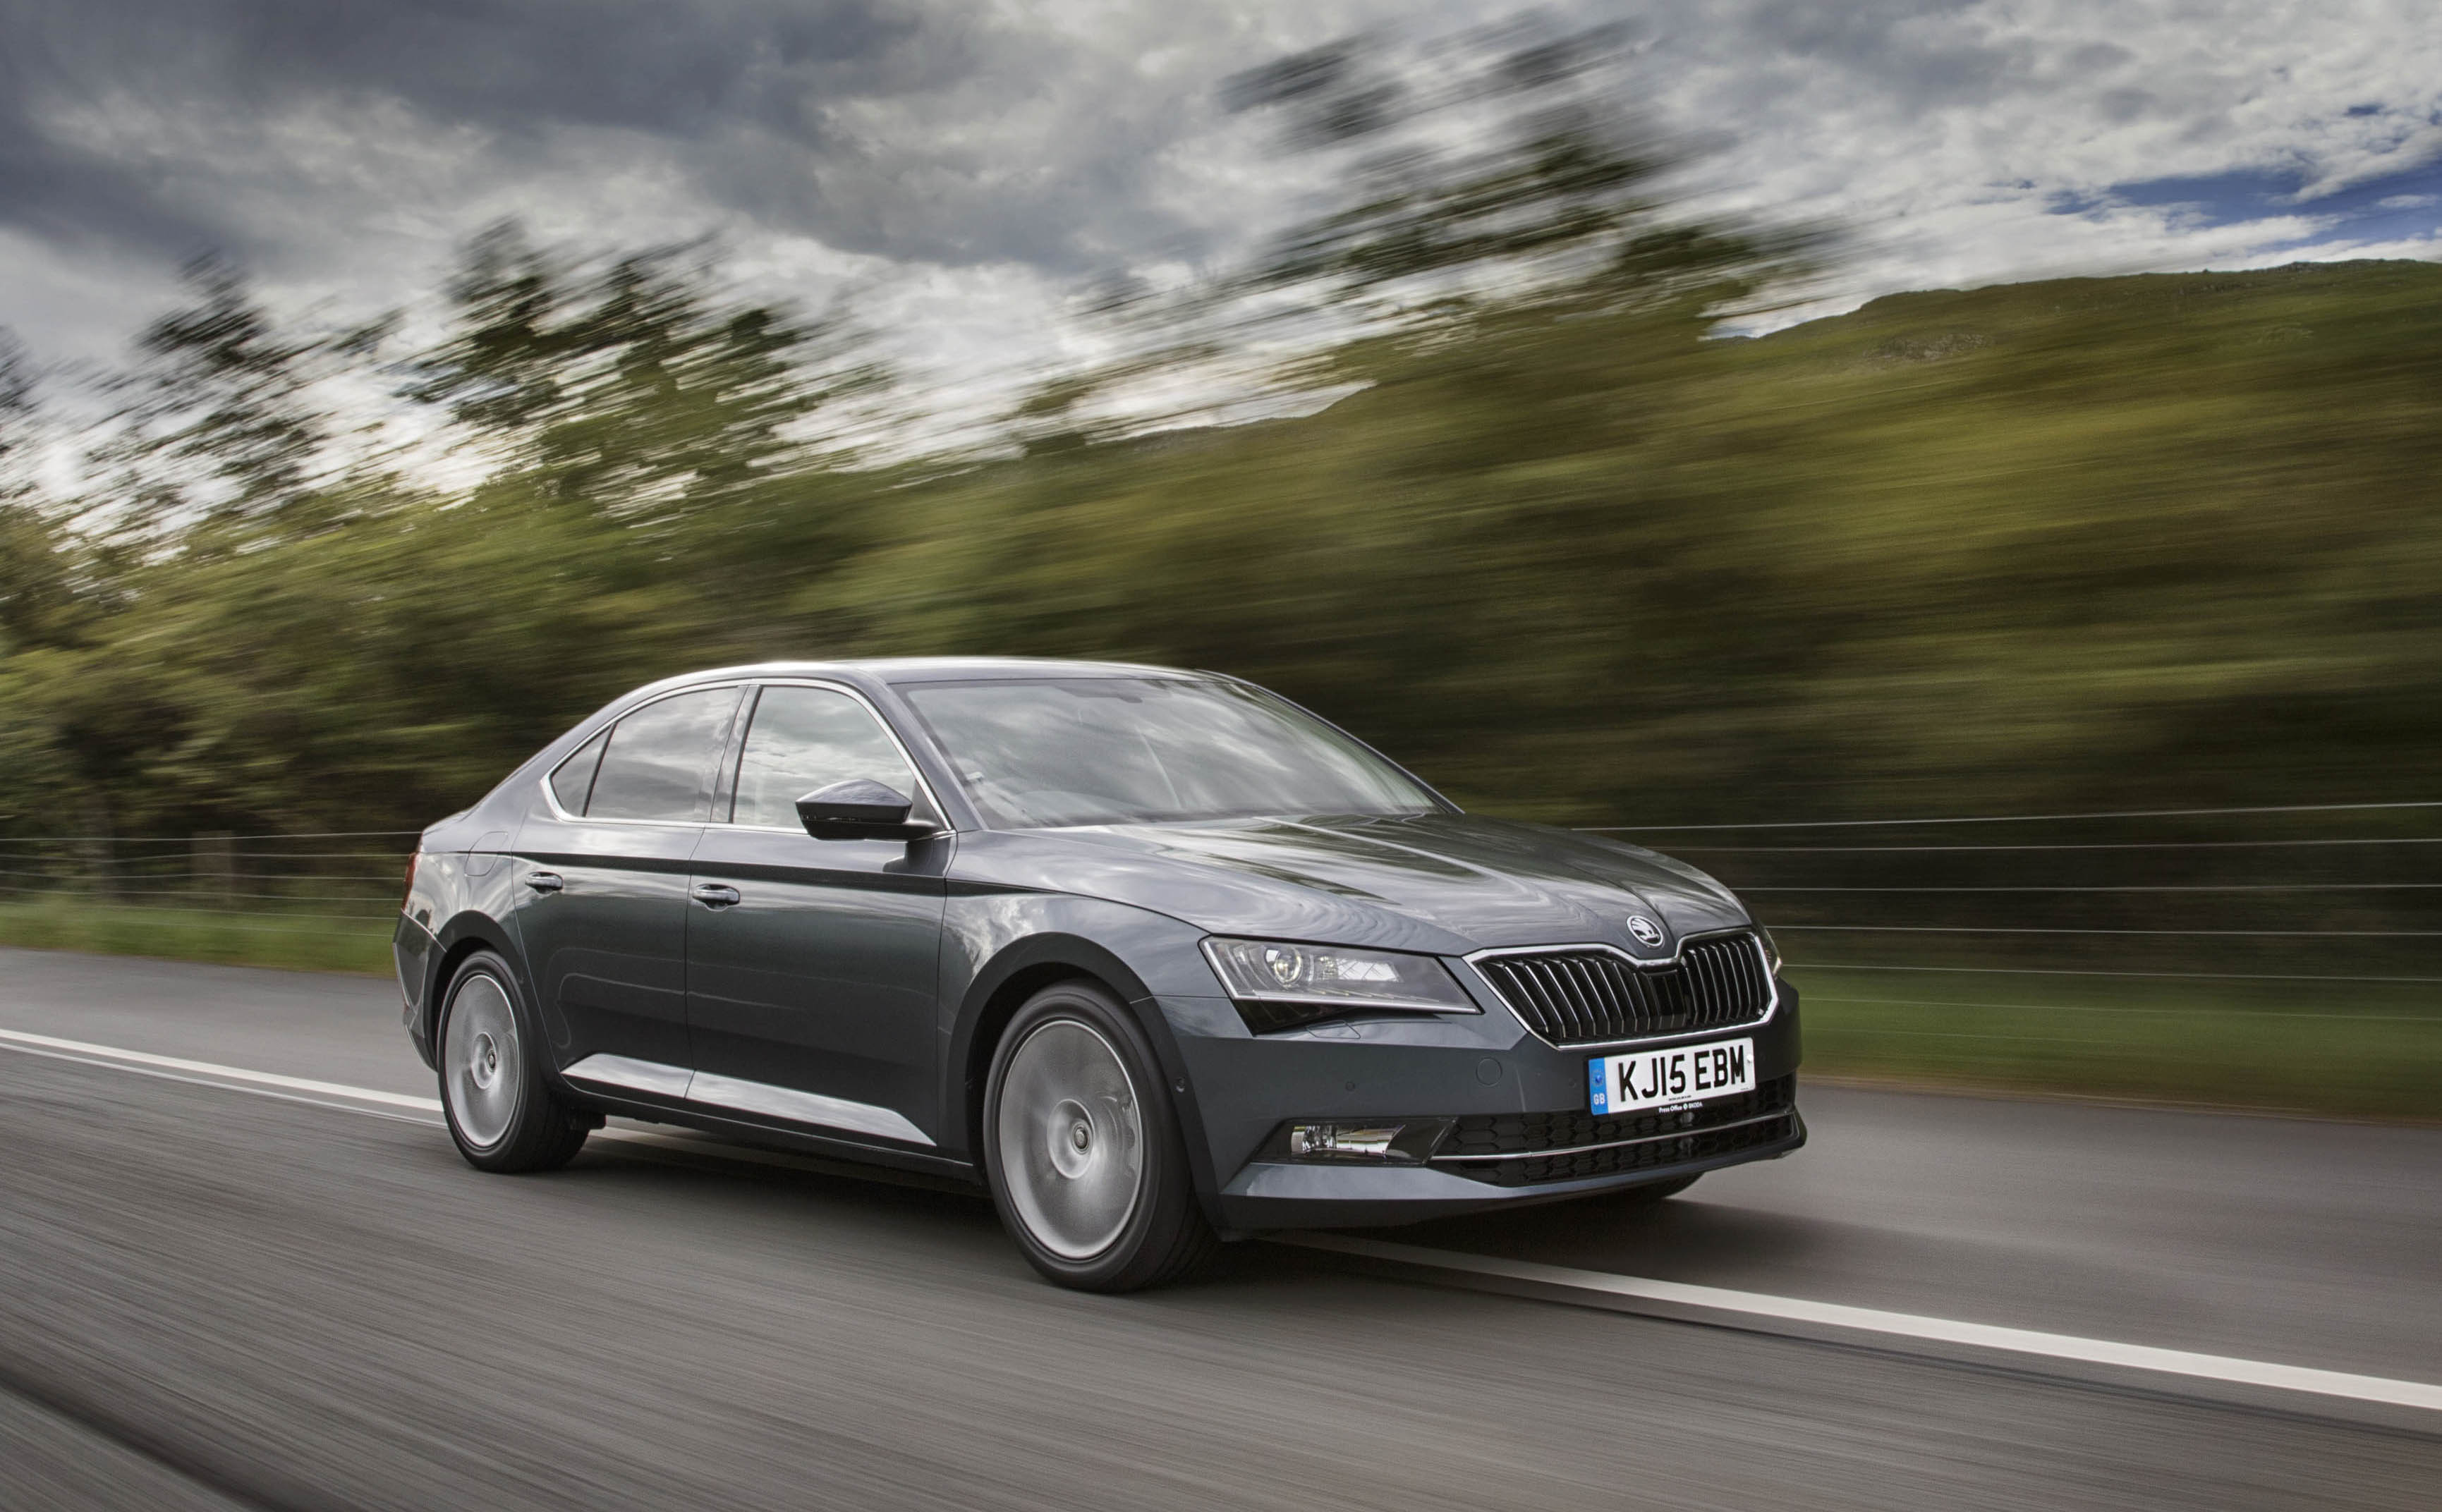 The 2016 Skoda Superb 2.0 TFSI 280 4x4 makes for a seriously quick but subtle sports saloon